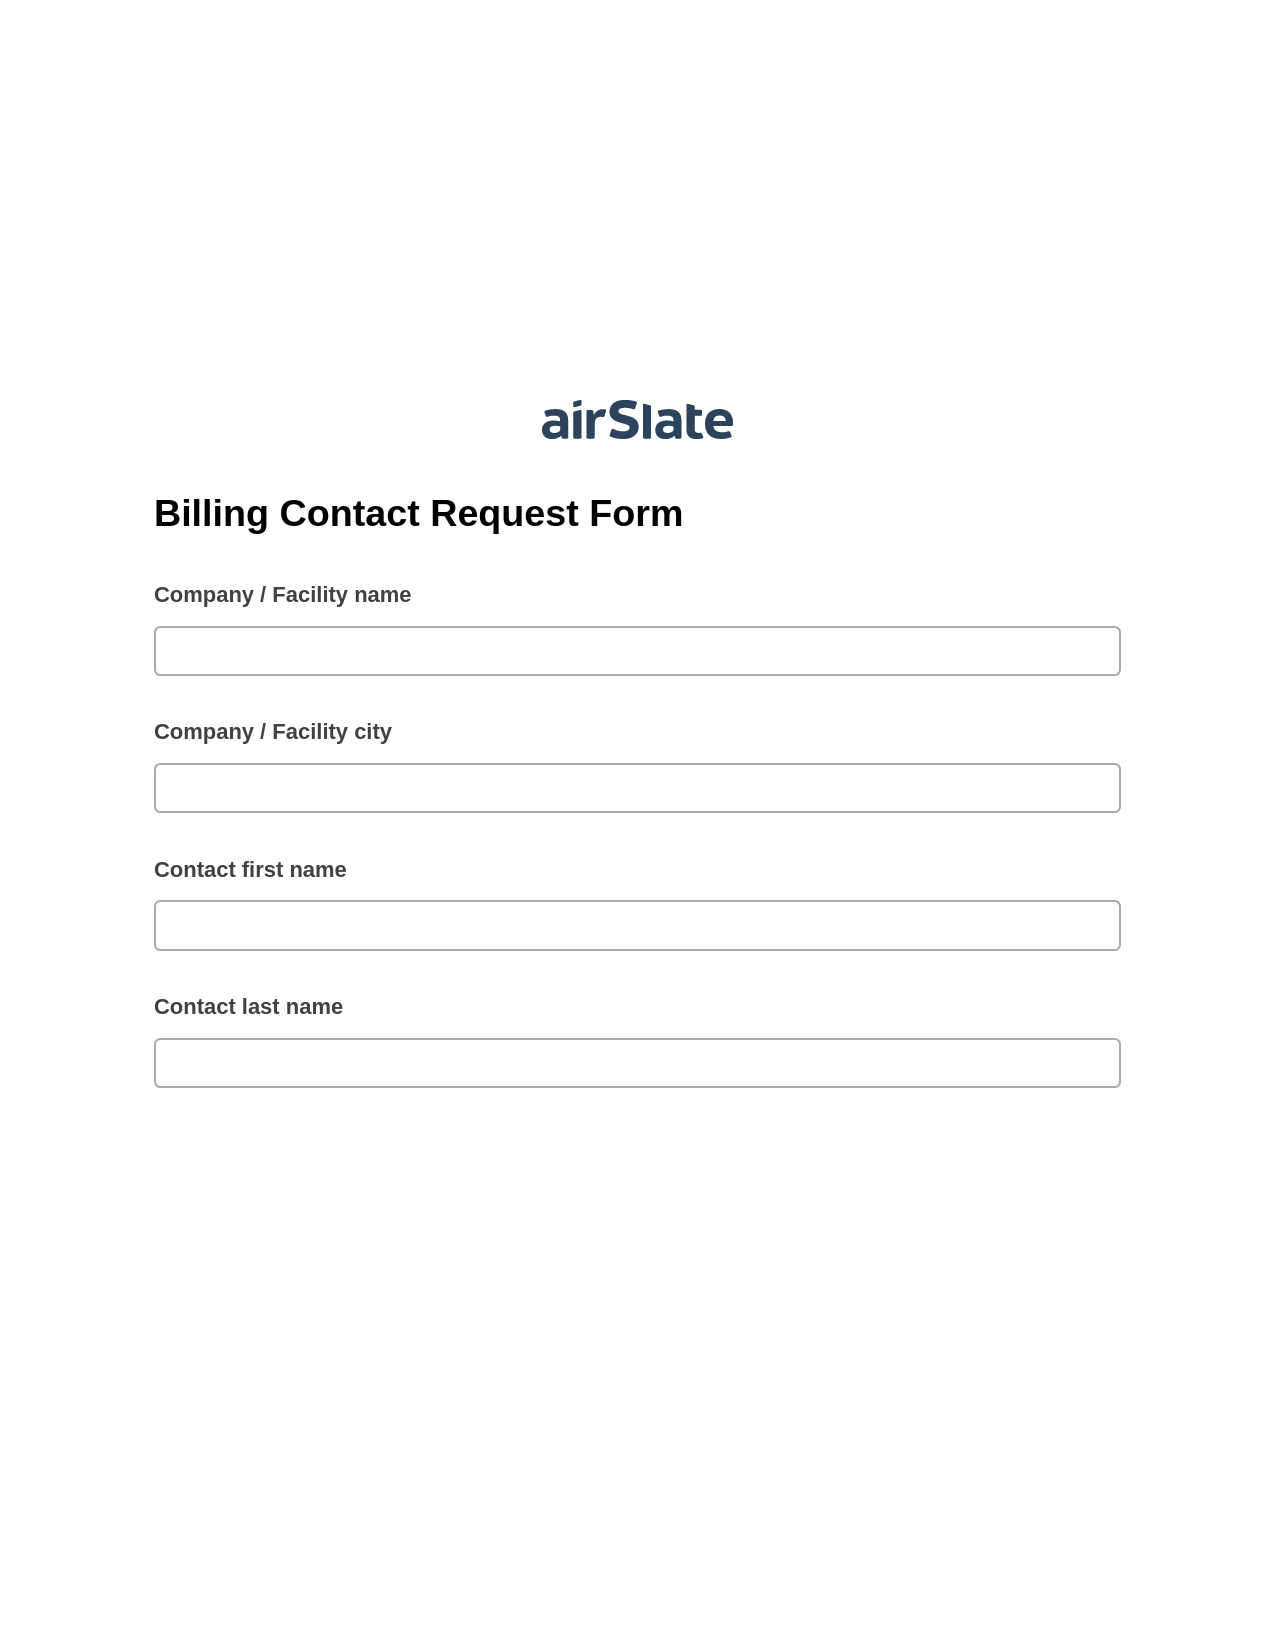 Billing Contact Request Form Pre-fill from NetSuite Records Bot, Google Sheet Two-Way Binding Bot, Post-finish Document Bot